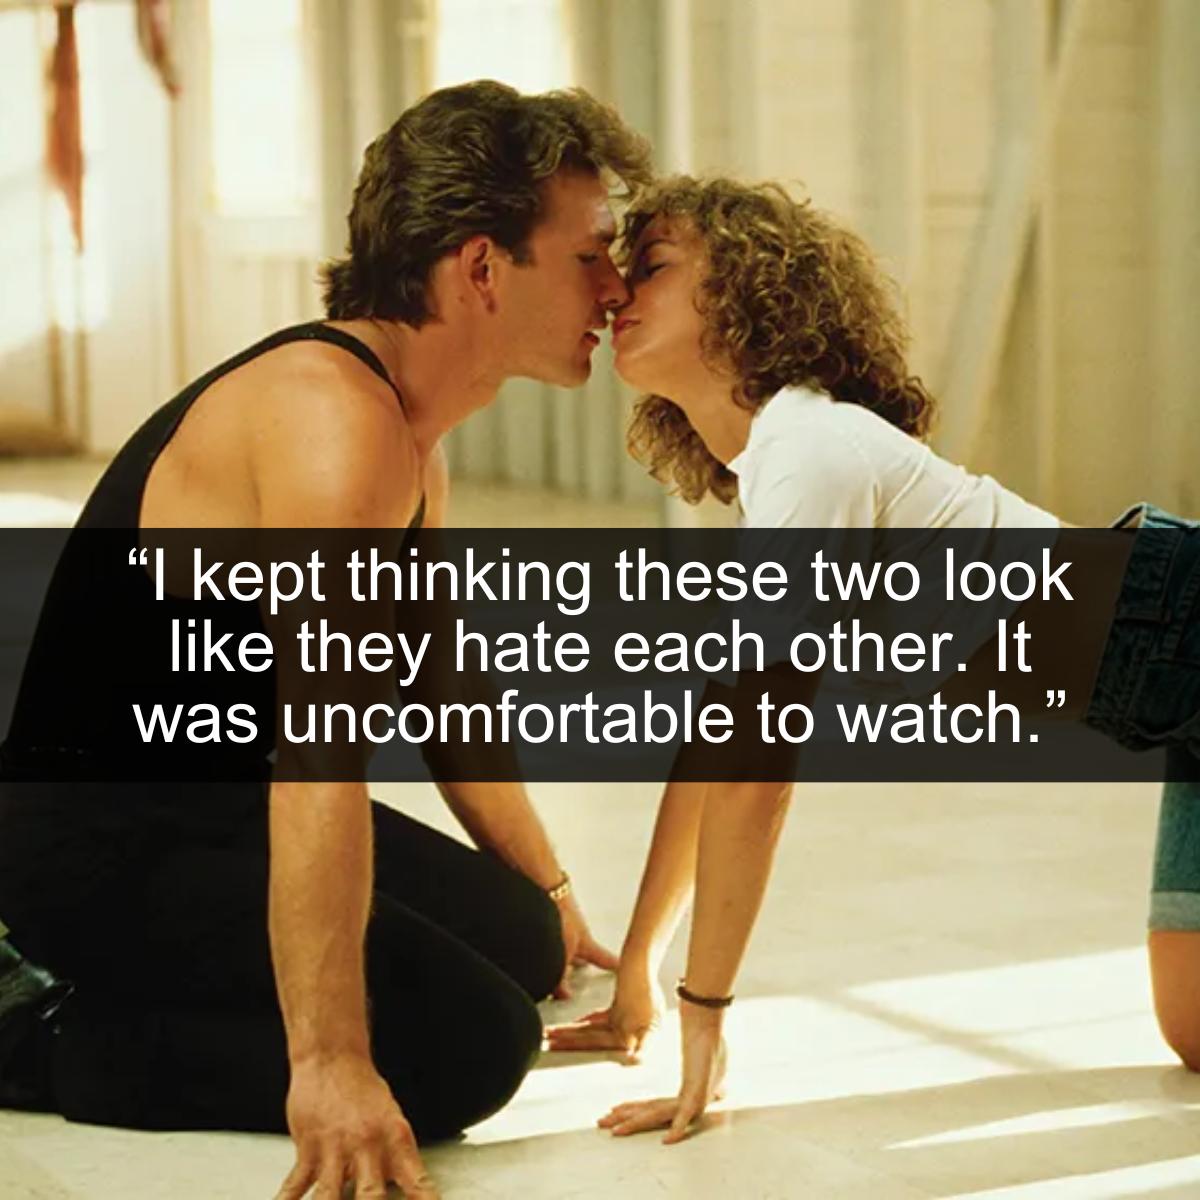 <p>What was Patrick Swayze doing with Jennifer Gray in Dirty Dancing? It was clear that Jennifer was not spending the summer looking for love. She just wanted a fun distraction and ended up getting carried away by this dude who was praying for people visiting the campsite. Someone, please, put Baby in the corner!</p> <p>If anything, it's almost like Johnny forced Baby to get into dancing as some sort of crazy mind game so he could prey on her. The emotions portrayed are just all over the place for some fans. This movie has a lot of red flags, and the relationship between the two main characters is definitely one of them. The follow-up really should have been called Dirty Dancing 2: The Restraining Order.</p>